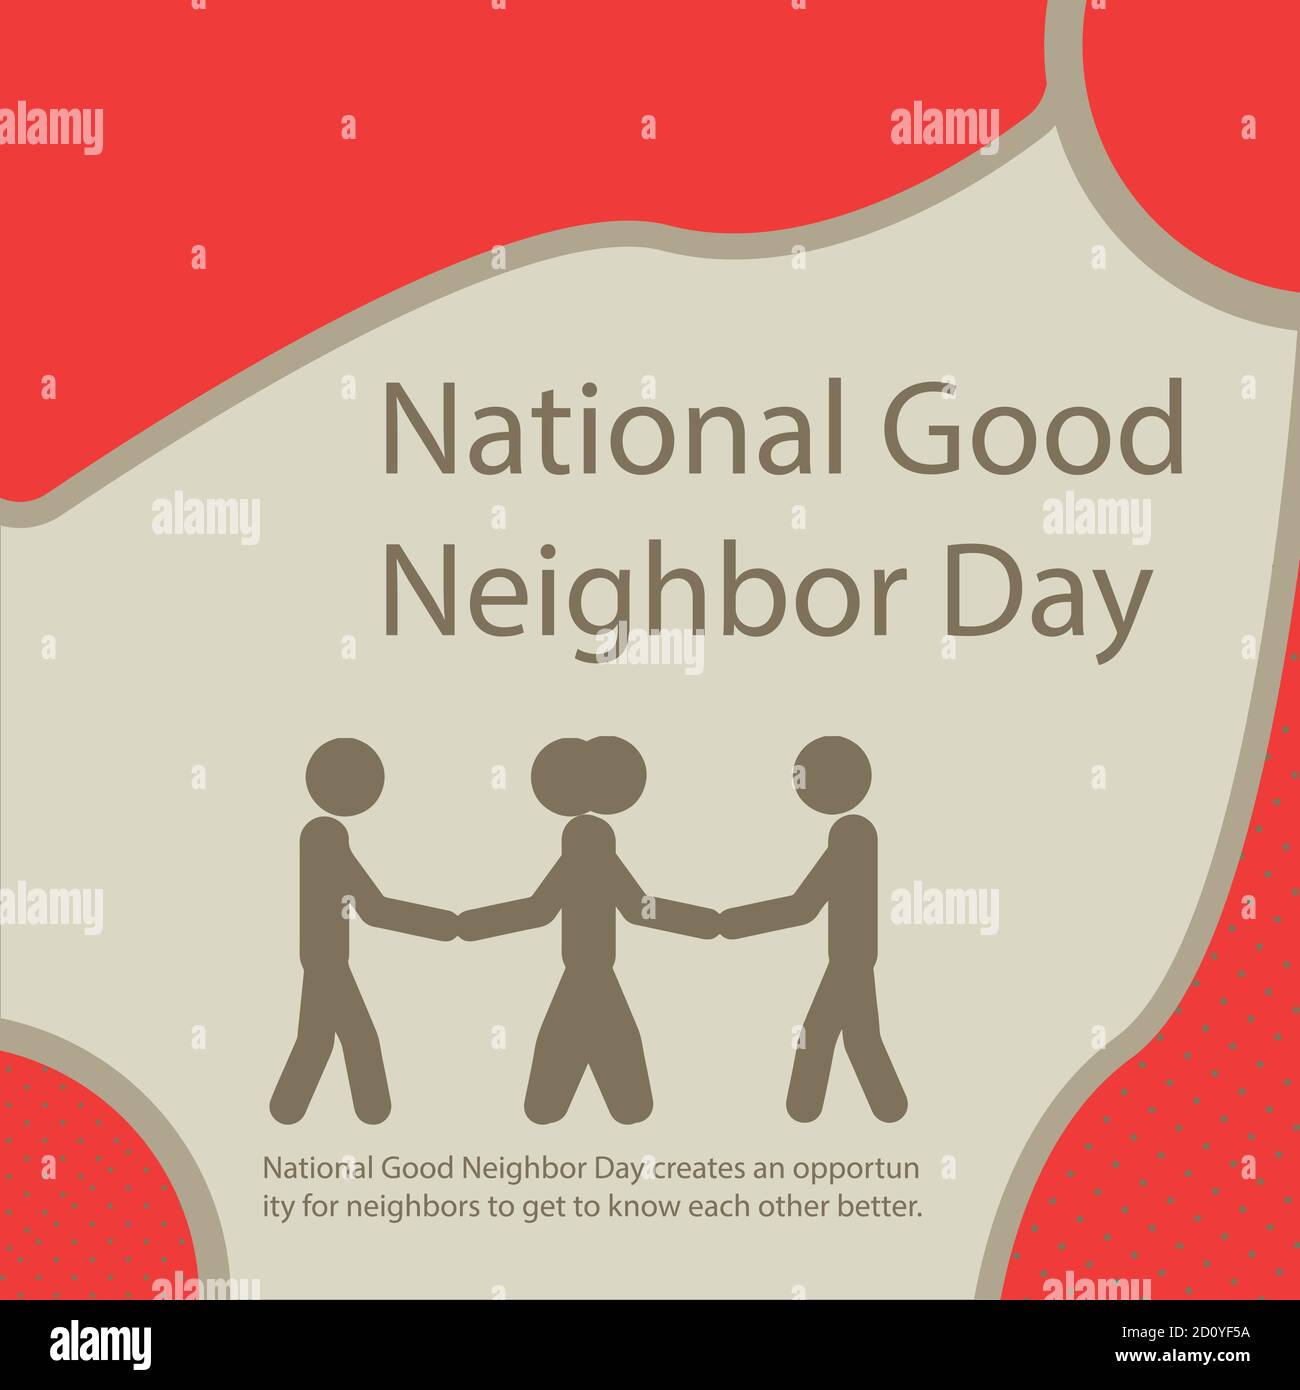 National Good Neighbor Day creates an opportunity for neighbors to get to know each other better. Stock Vector